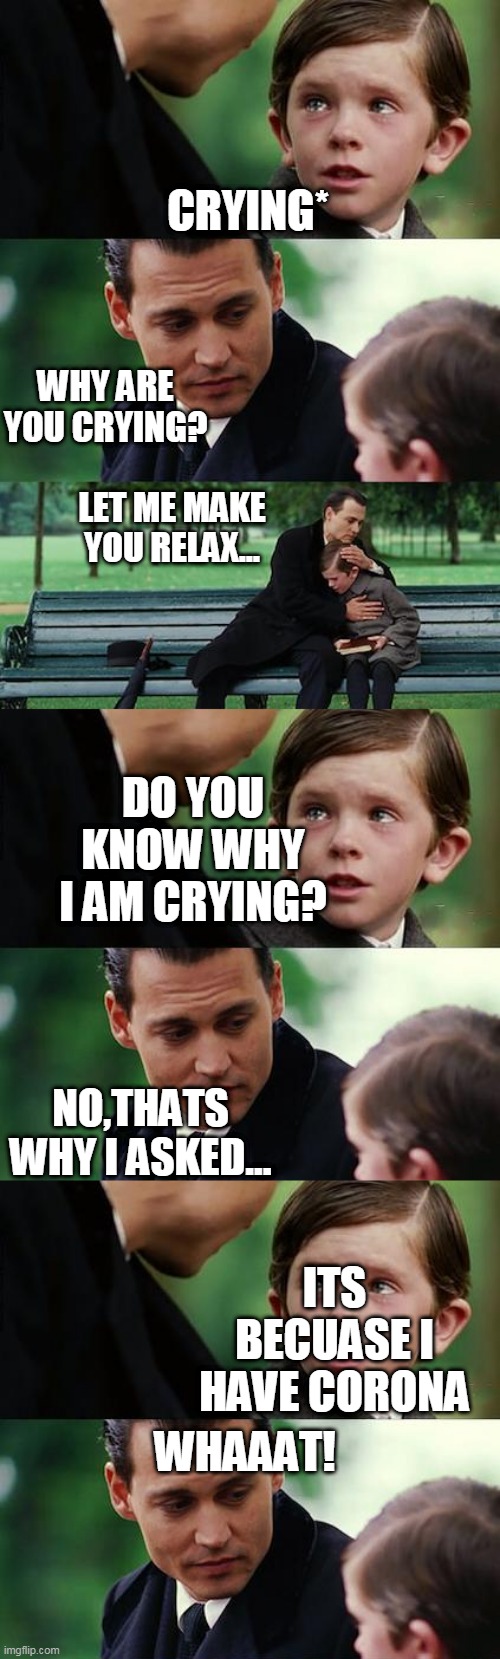 corona kid thing by aazim lol | CRYING*; WHY ARE YOU CRYING? LET ME MAKE YOU RELAX... DO YOU KNOW WHY I AM CRYING? NO,THATS WHY I ASKED... ITS BECUASE I HAVE CORONA; WHAAAT! | image tagged in memes,finding neverland | made w/ Imgflip meme maker